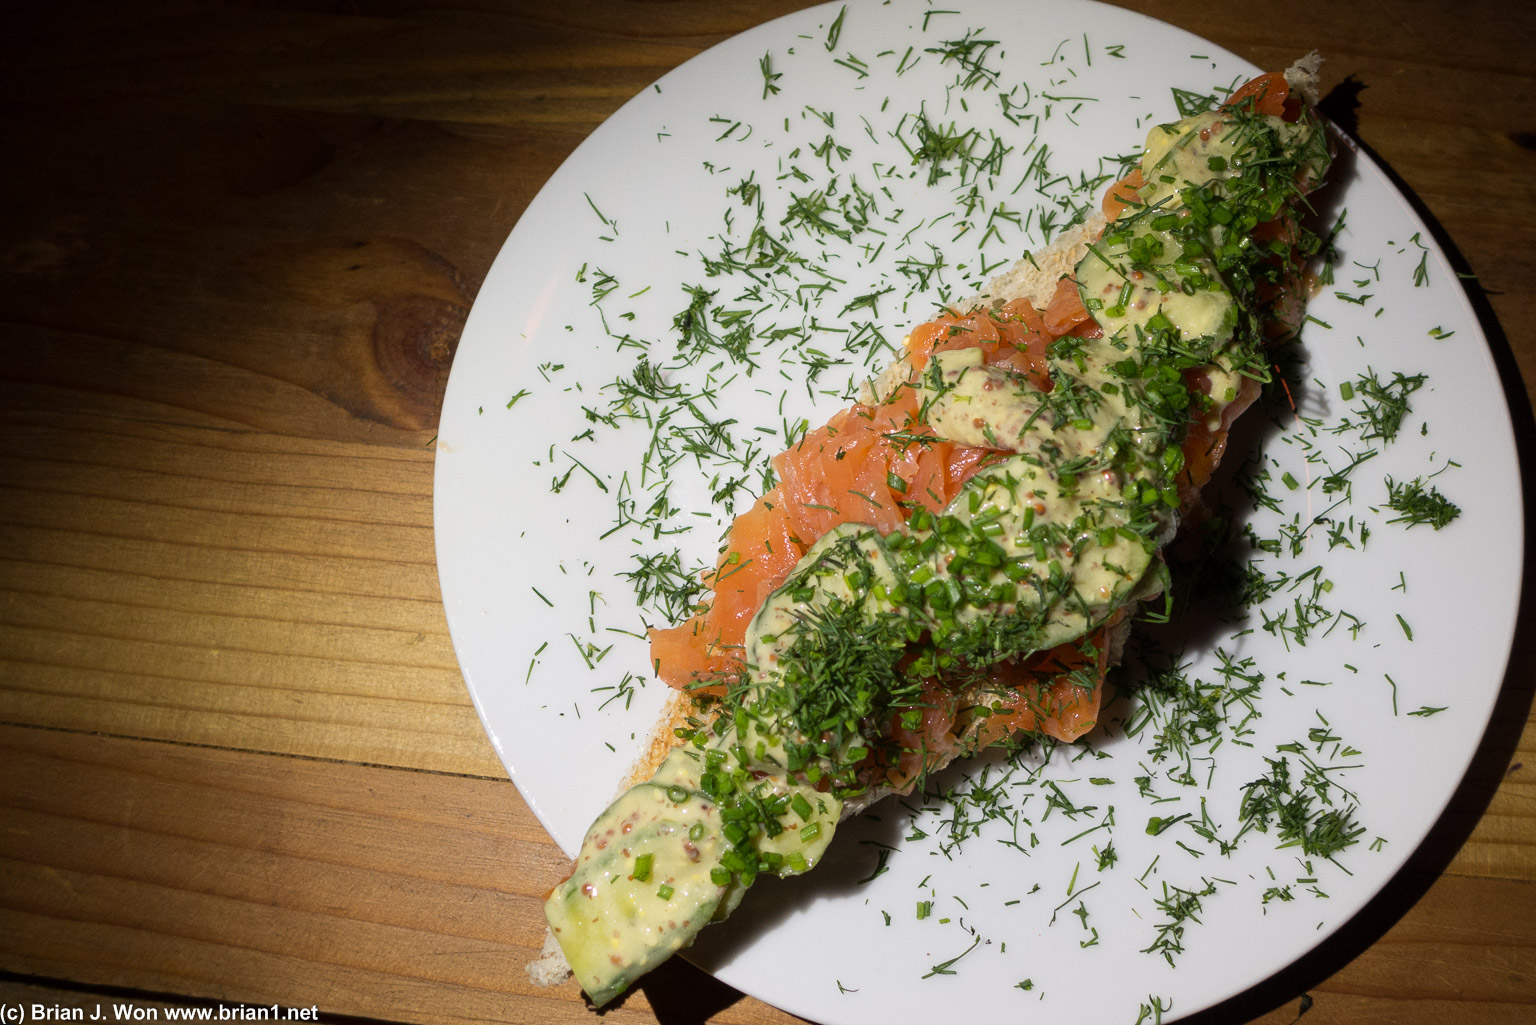 Gravlax. House cured salmon on toast. Quite good, and among the more familiar tastes here for this non-Nordic.